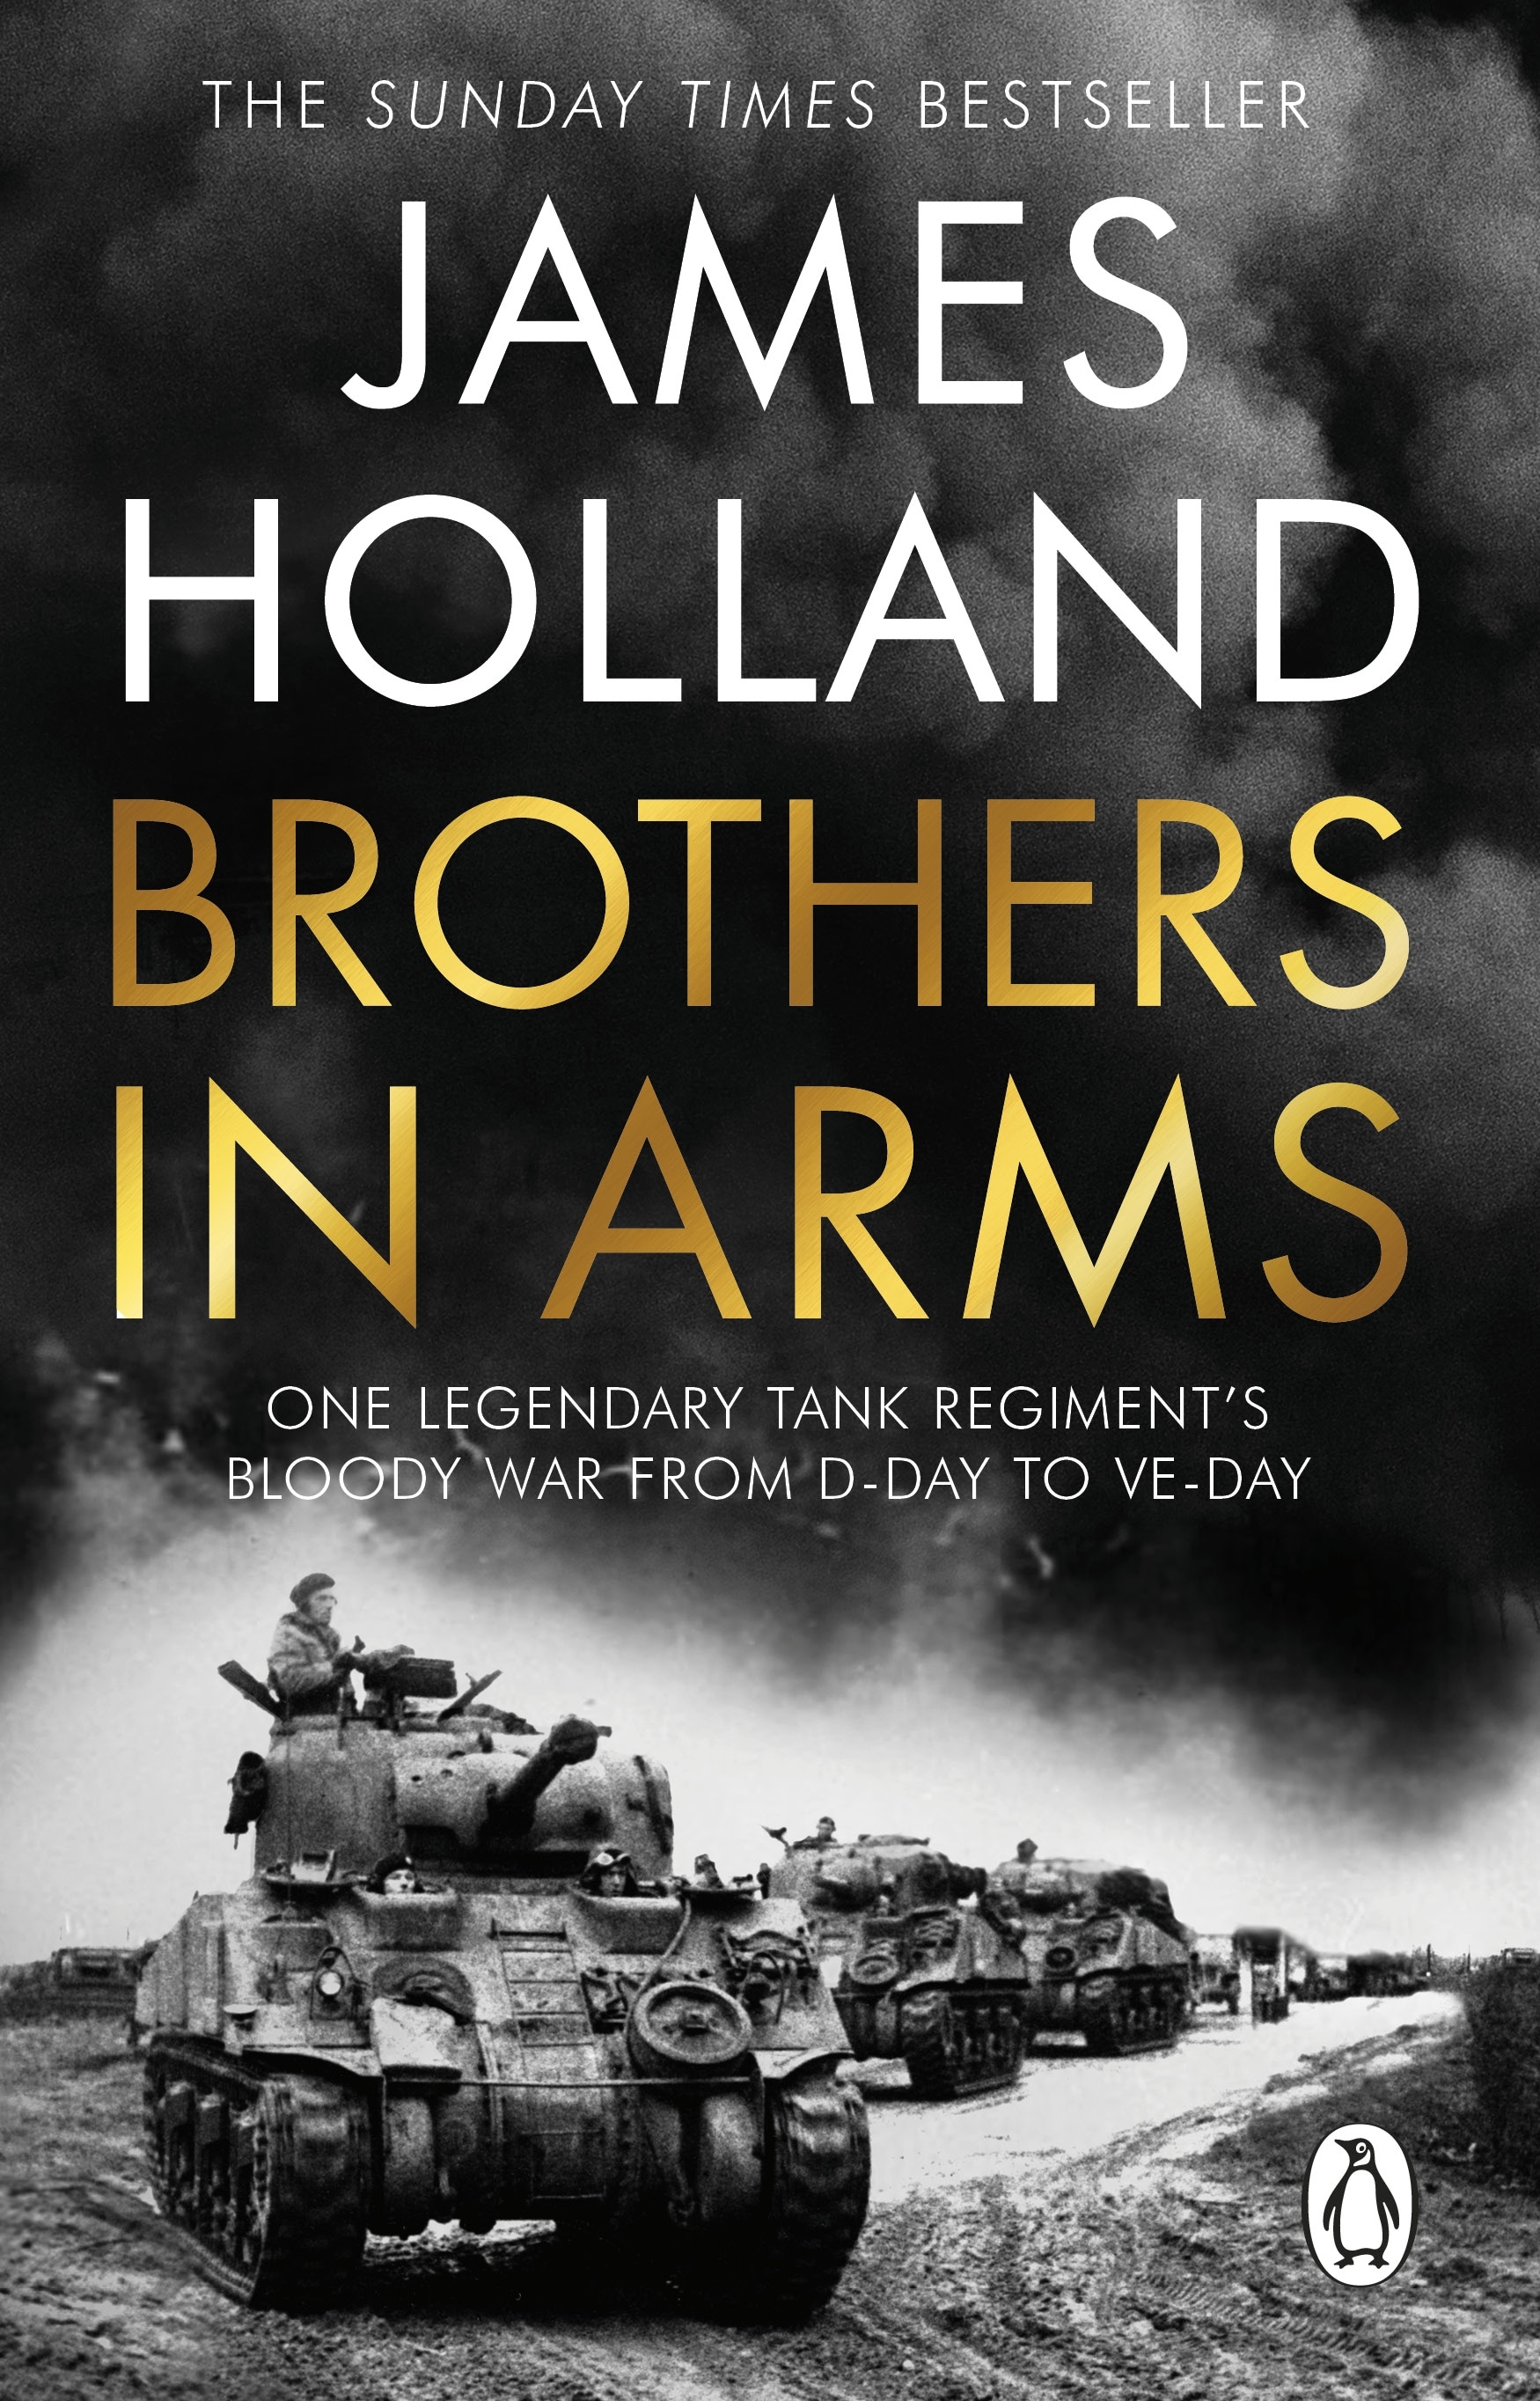 Book “Brothers in Arms” by James Holland — May 12, 2022